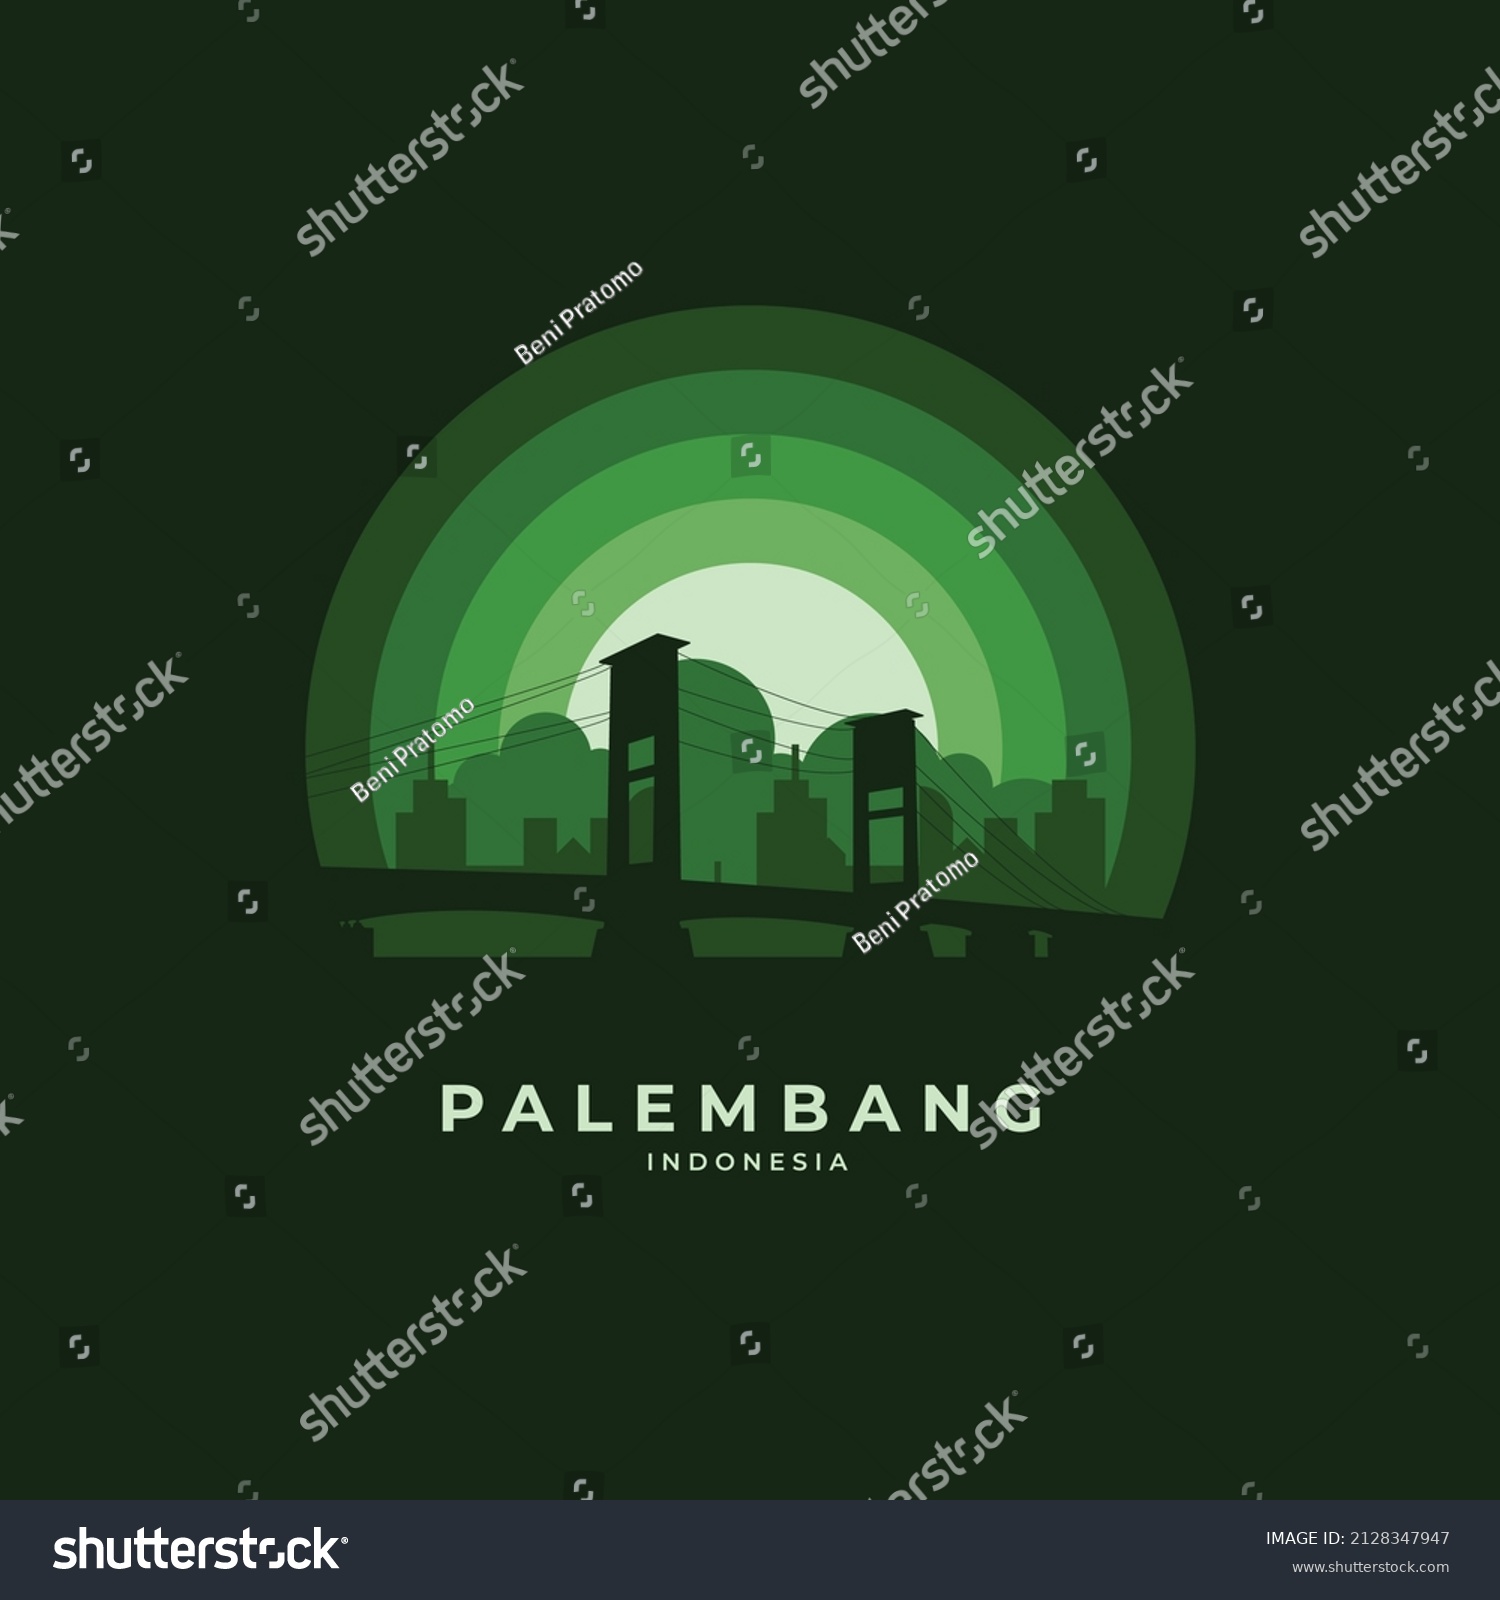 SVG of Palembang city silhouette and view svg